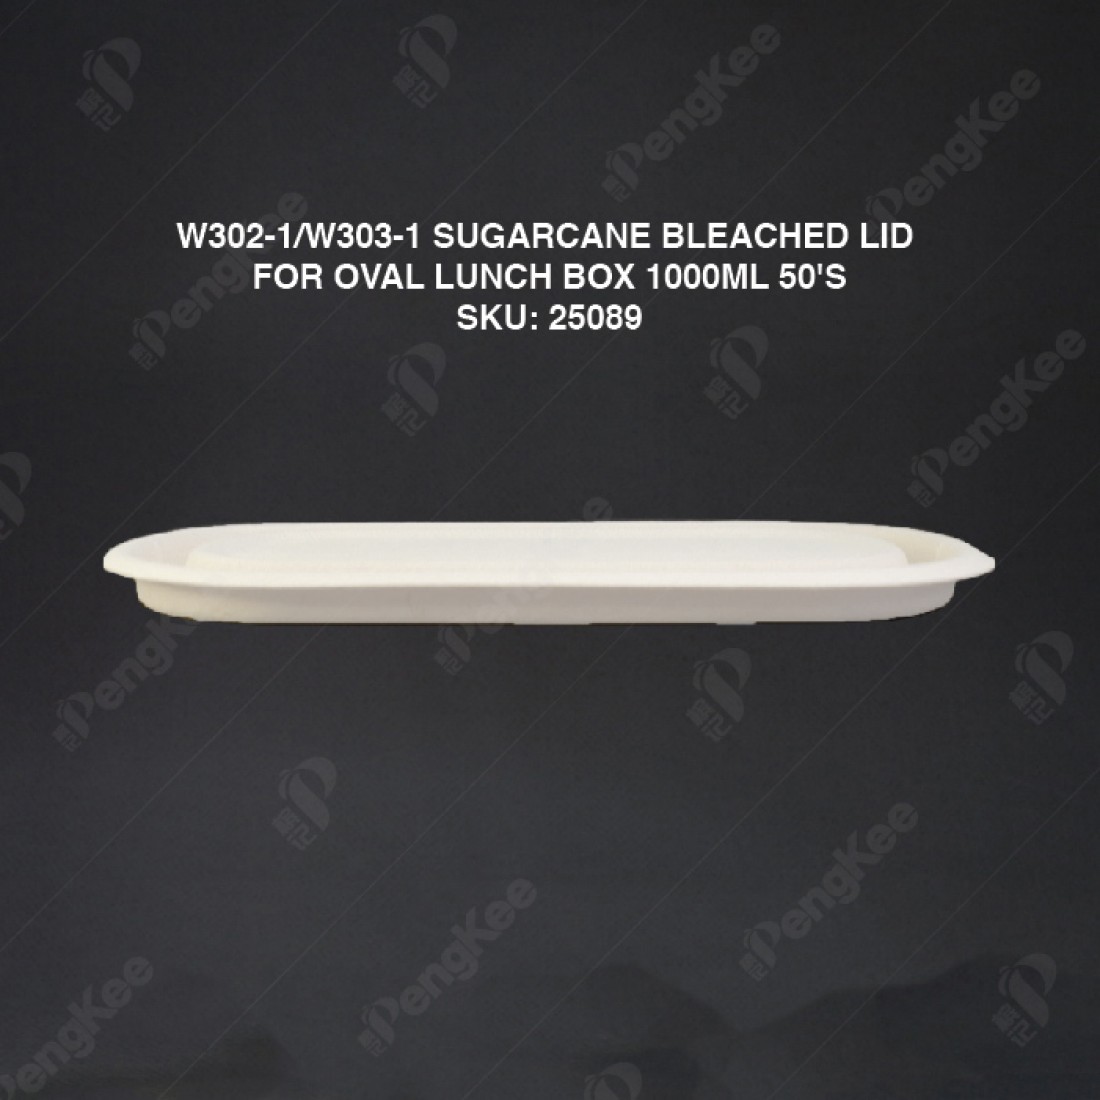 W302-1/W303-1 SUGARCANE BLEACHED LID FOR OVAL LUNCH BOX 1000ML